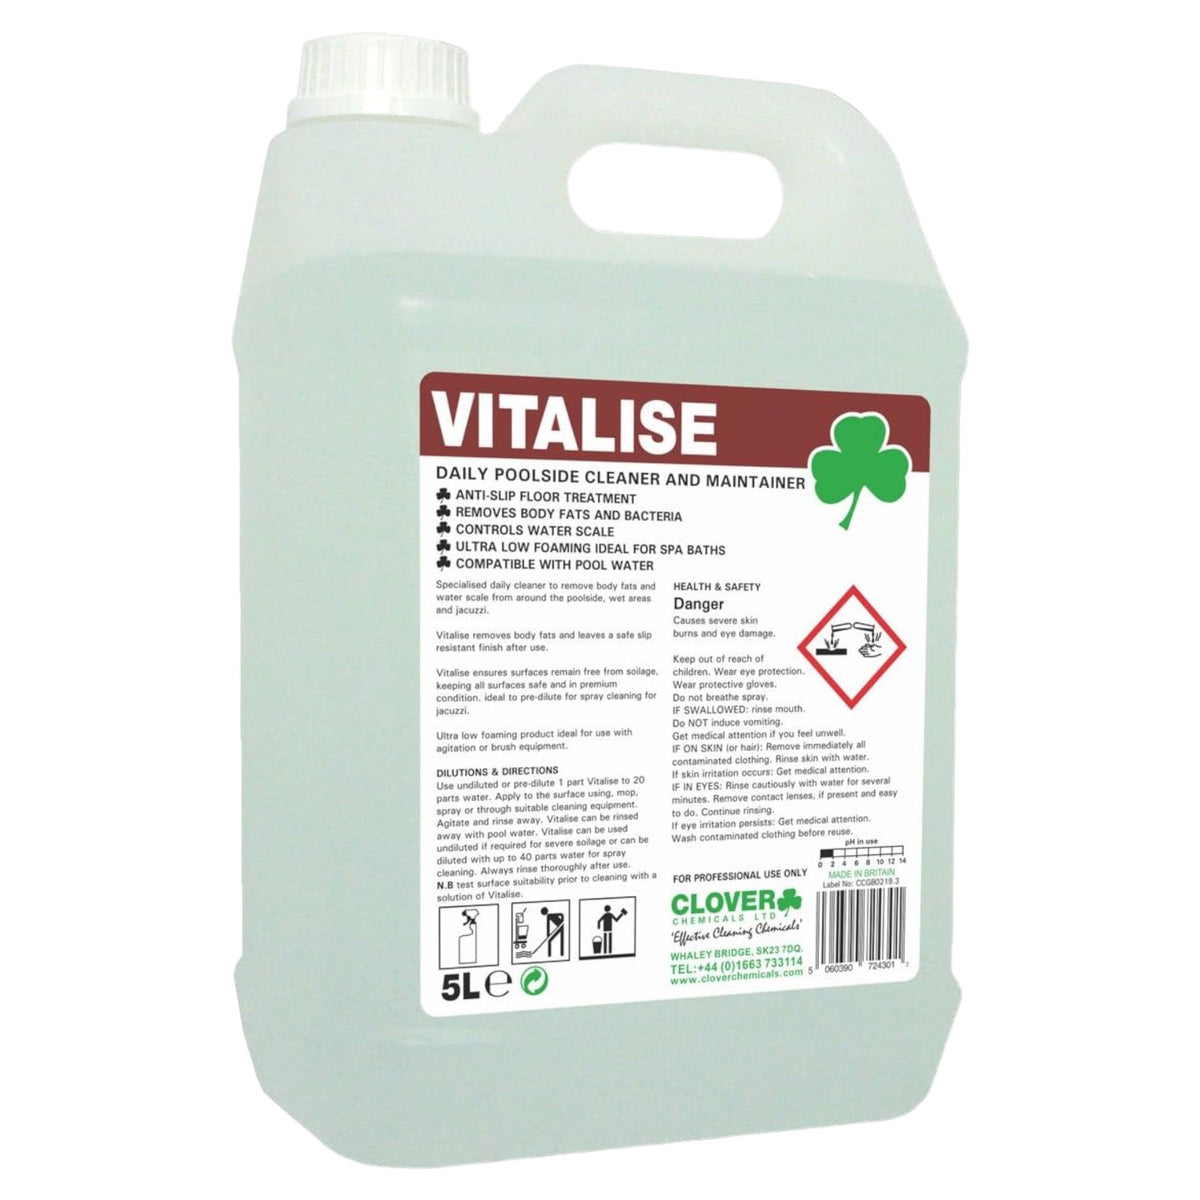 Clover Chemicals Vitalise Poolside Cleaner and Maintainer 5 Litre